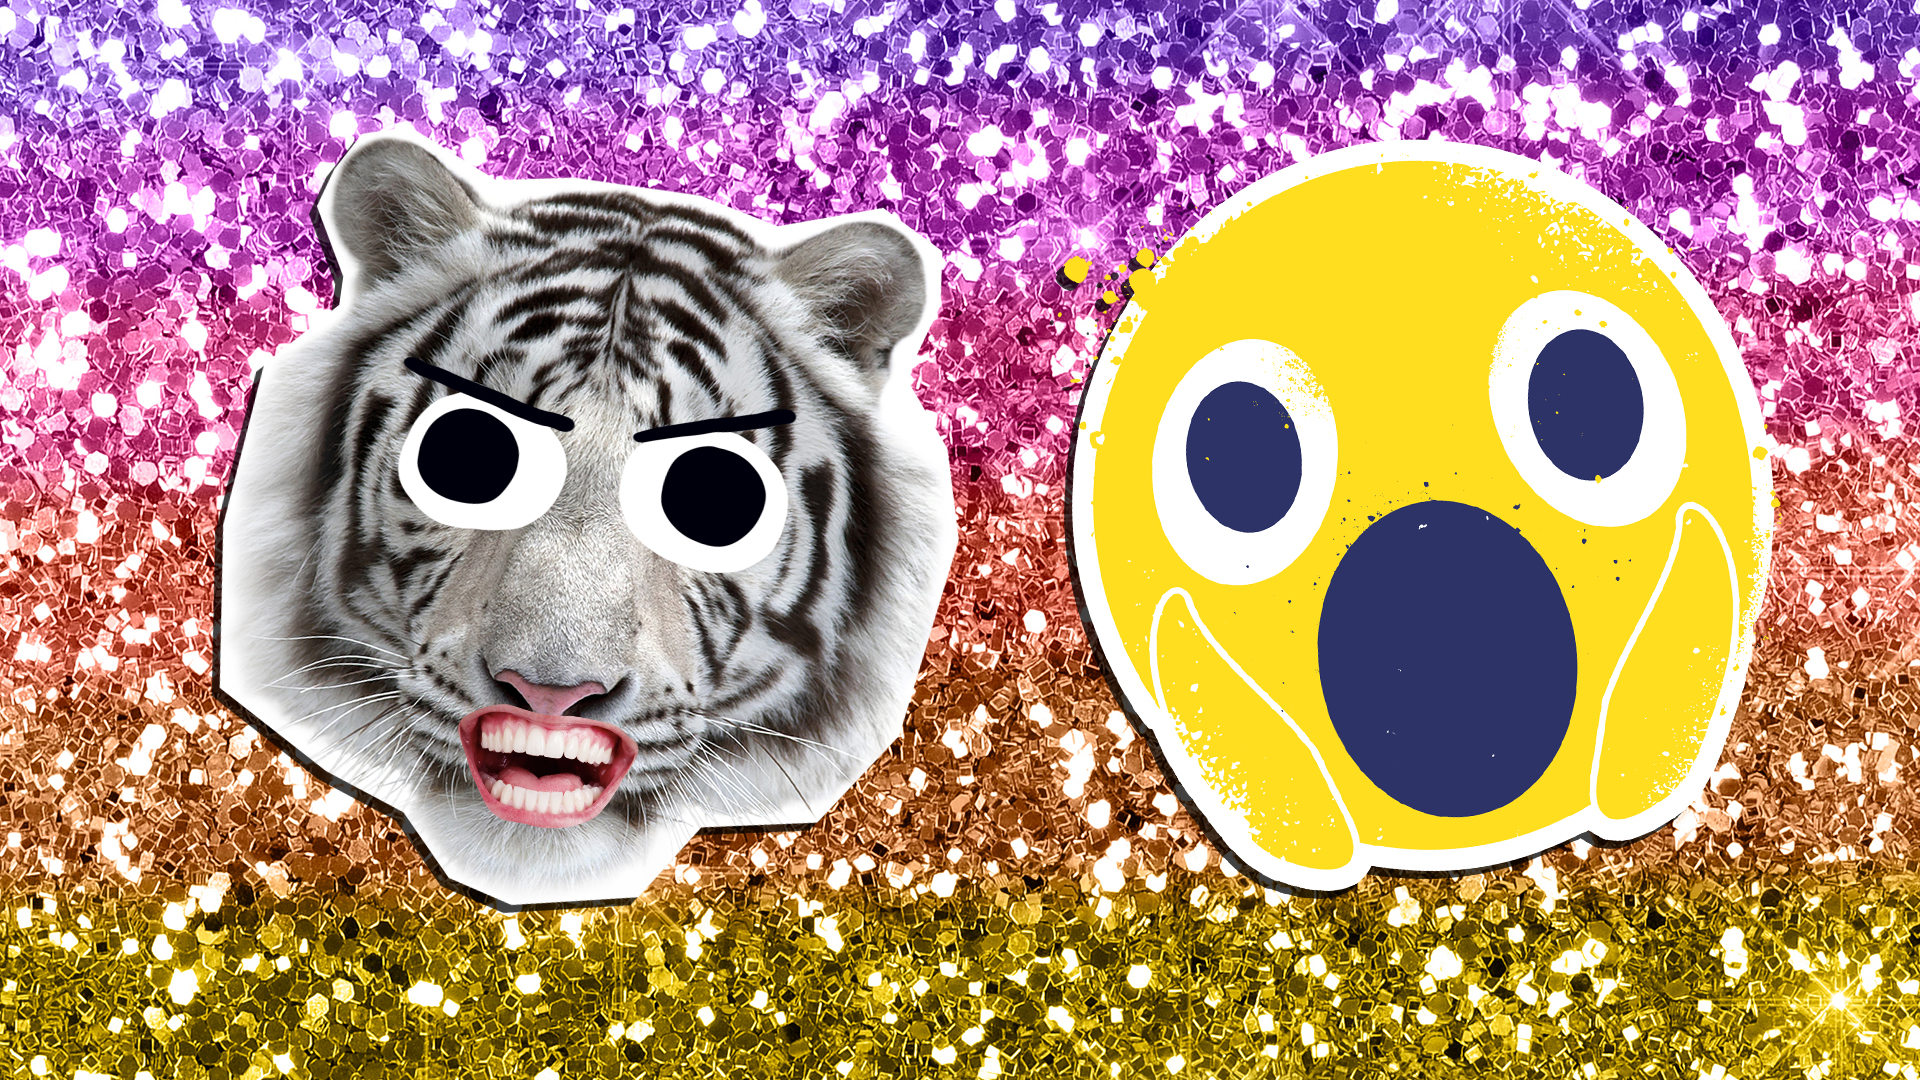  A grinning white tiger and a shocked emoji face